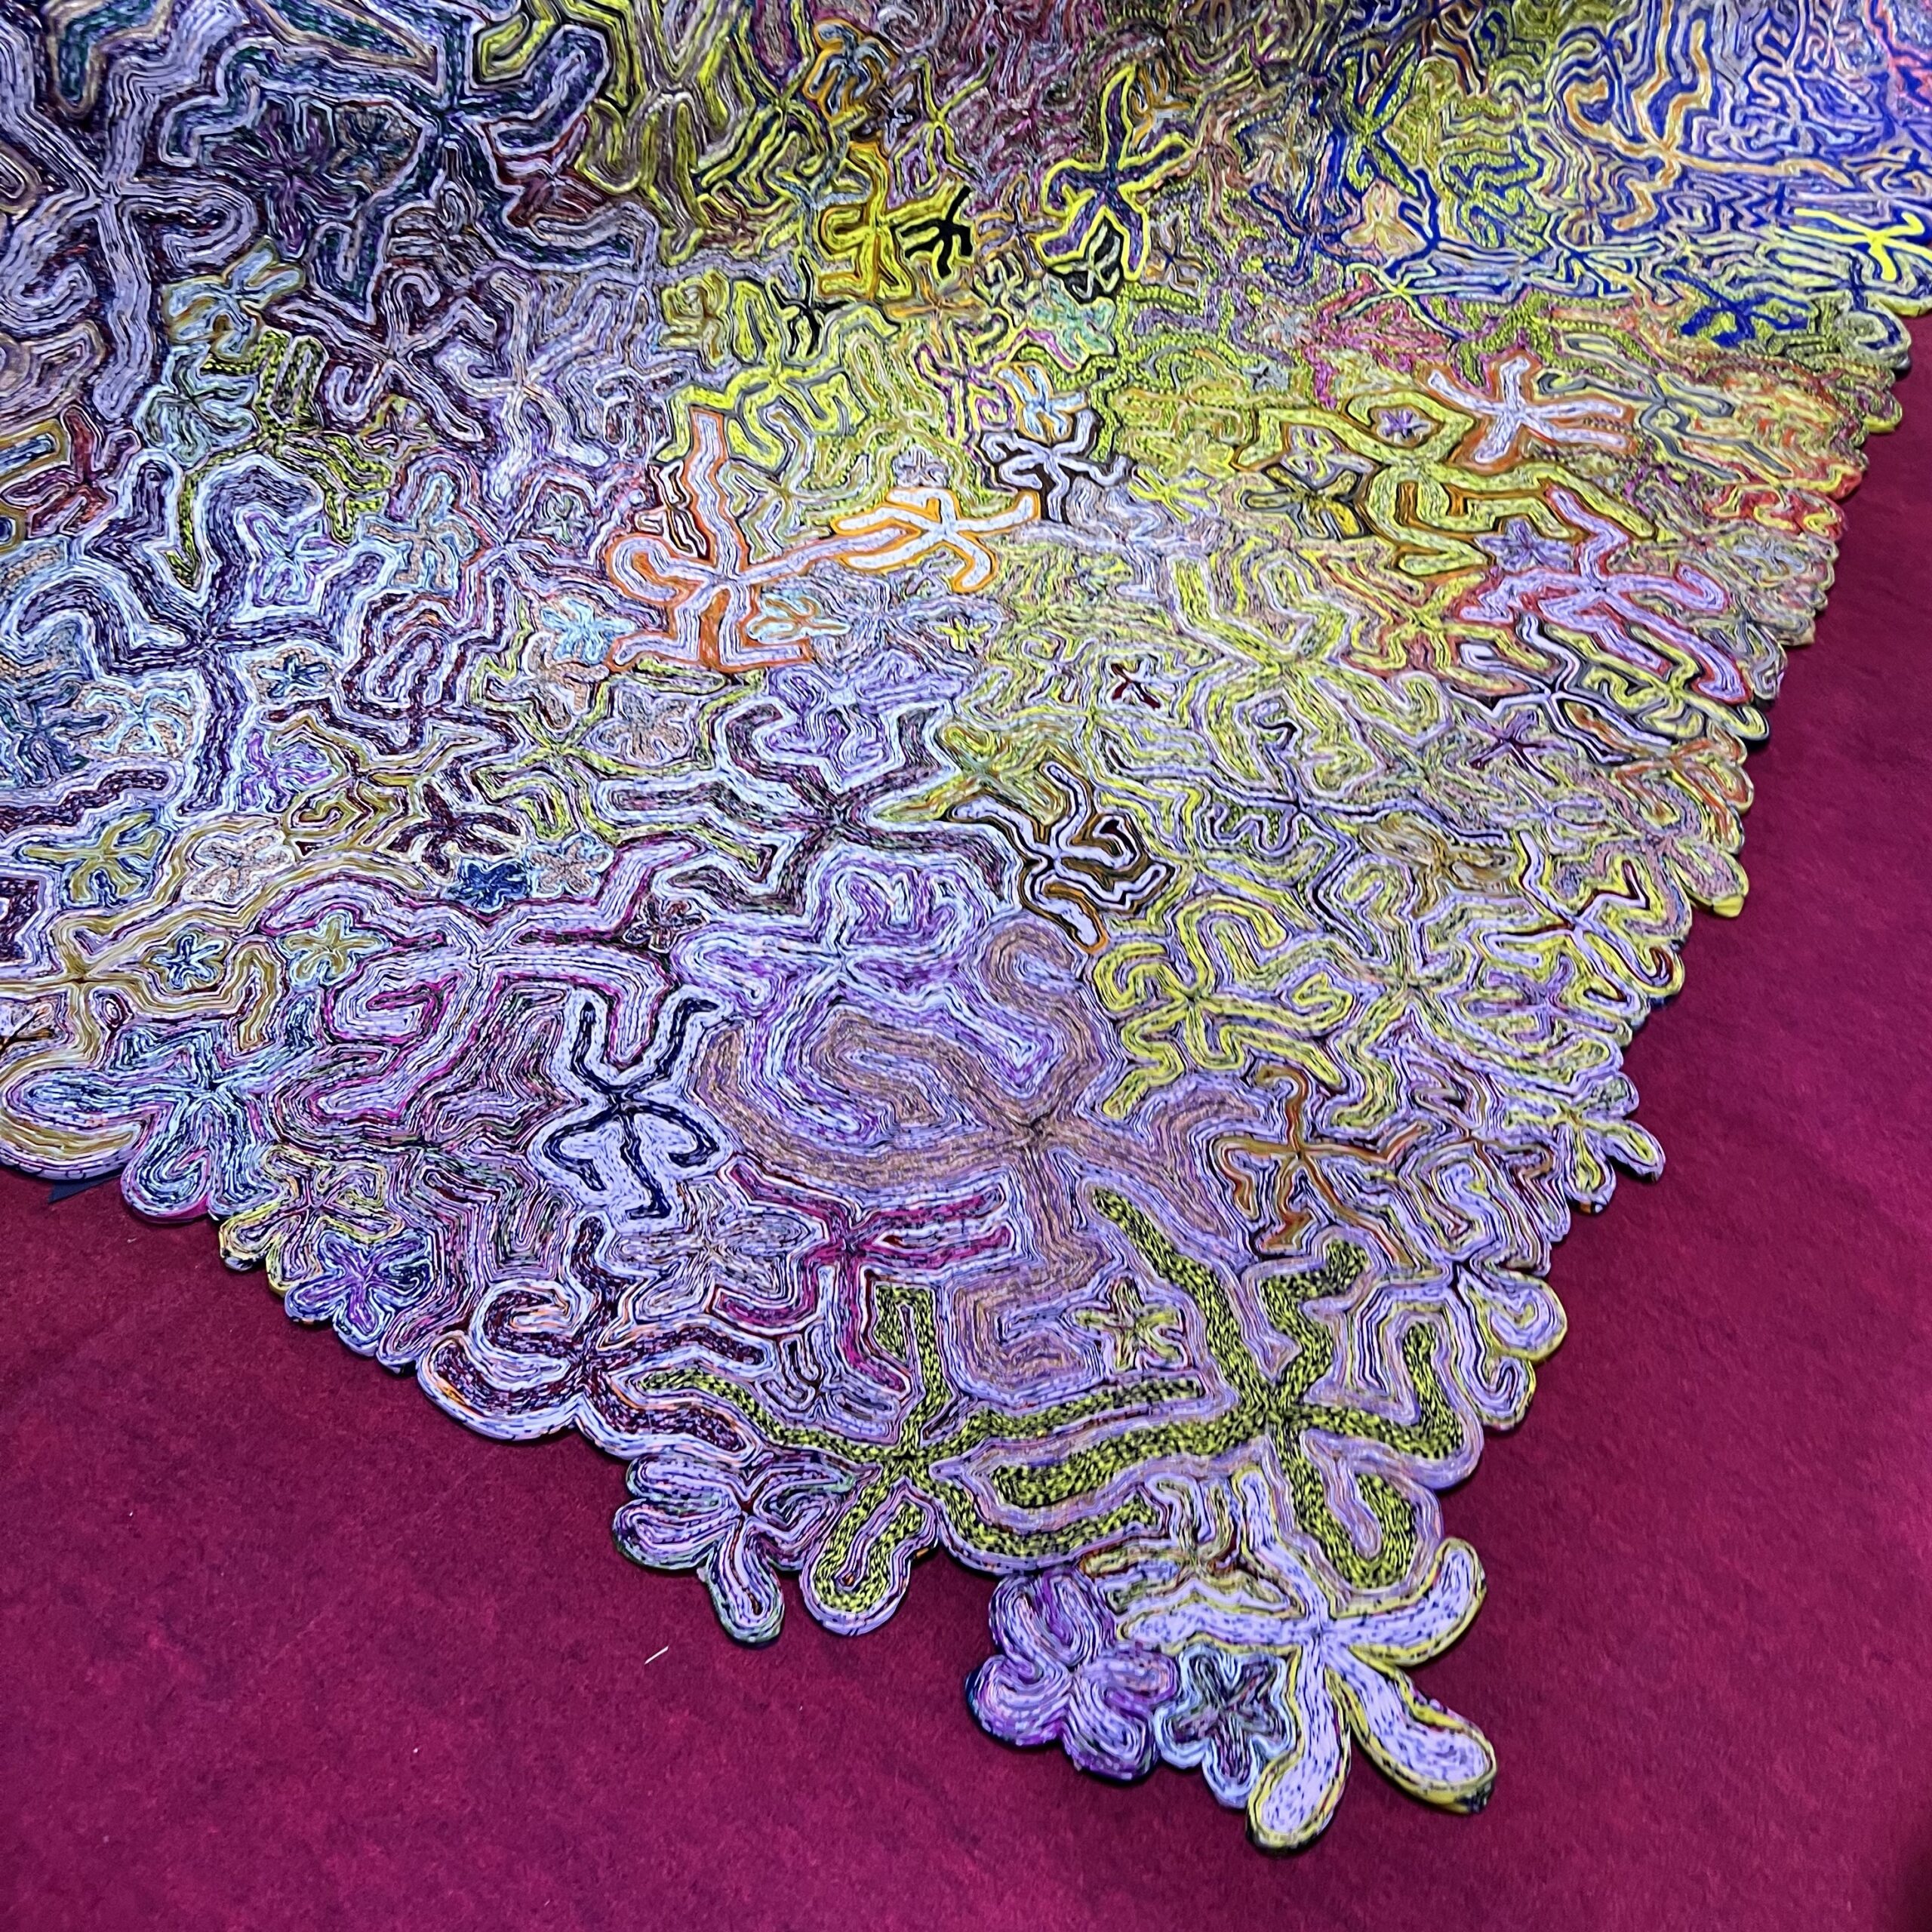 Fibers from post-industrial waste used in a swirling fabric - photo